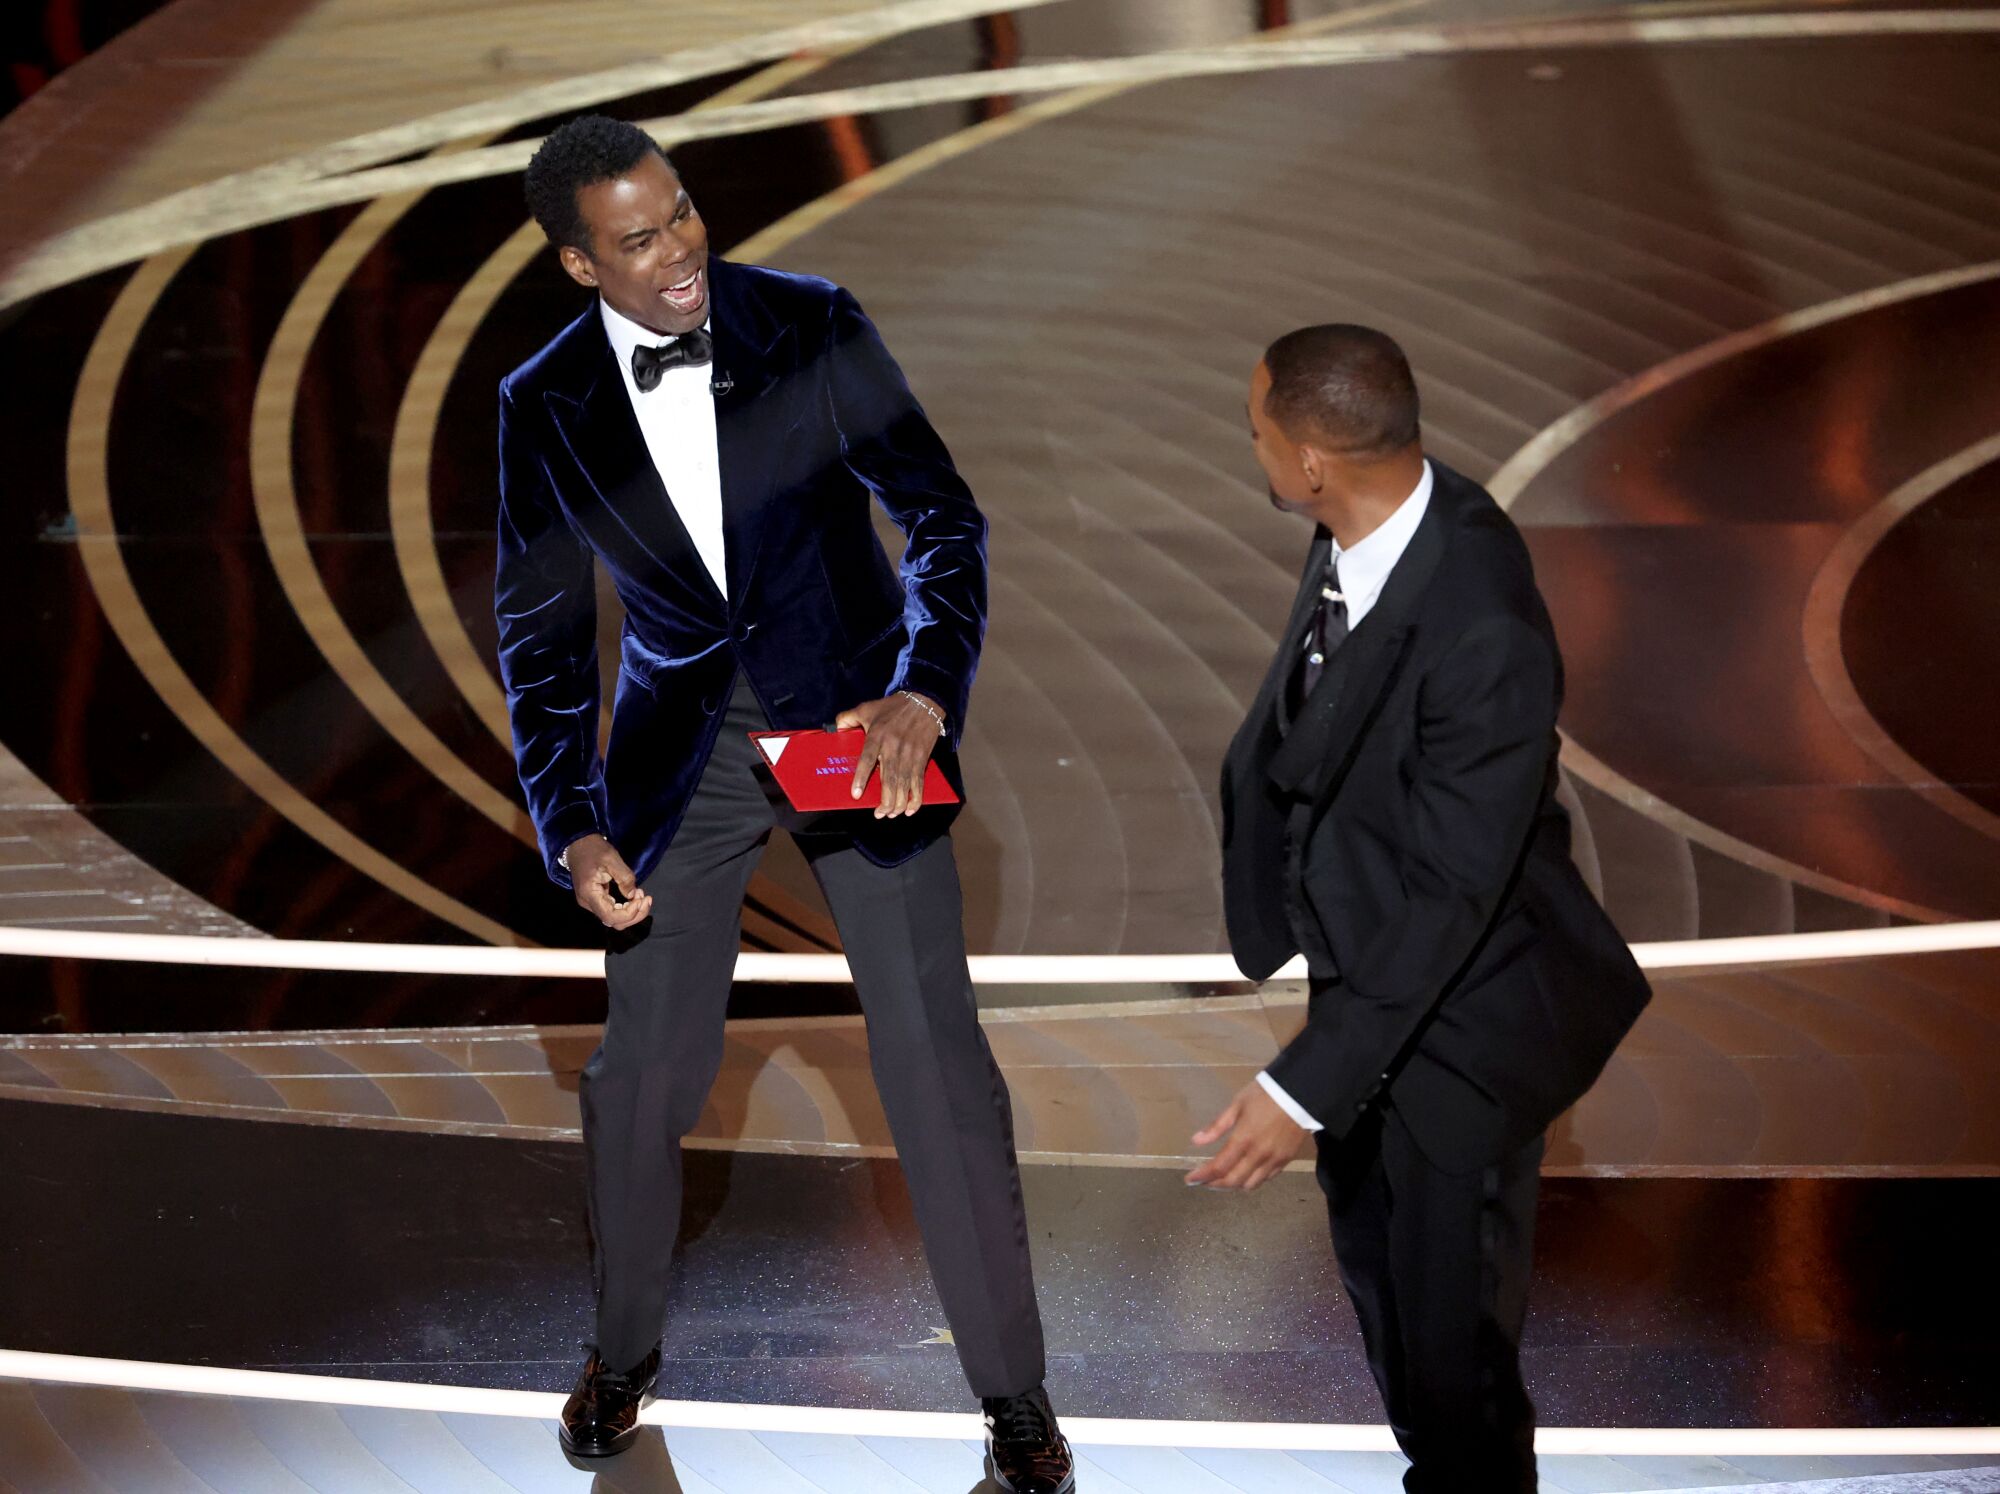 Chris Rock after he was slapped by Will Smith onstage during the 94th Academy Awards at the Dolby Theatre.